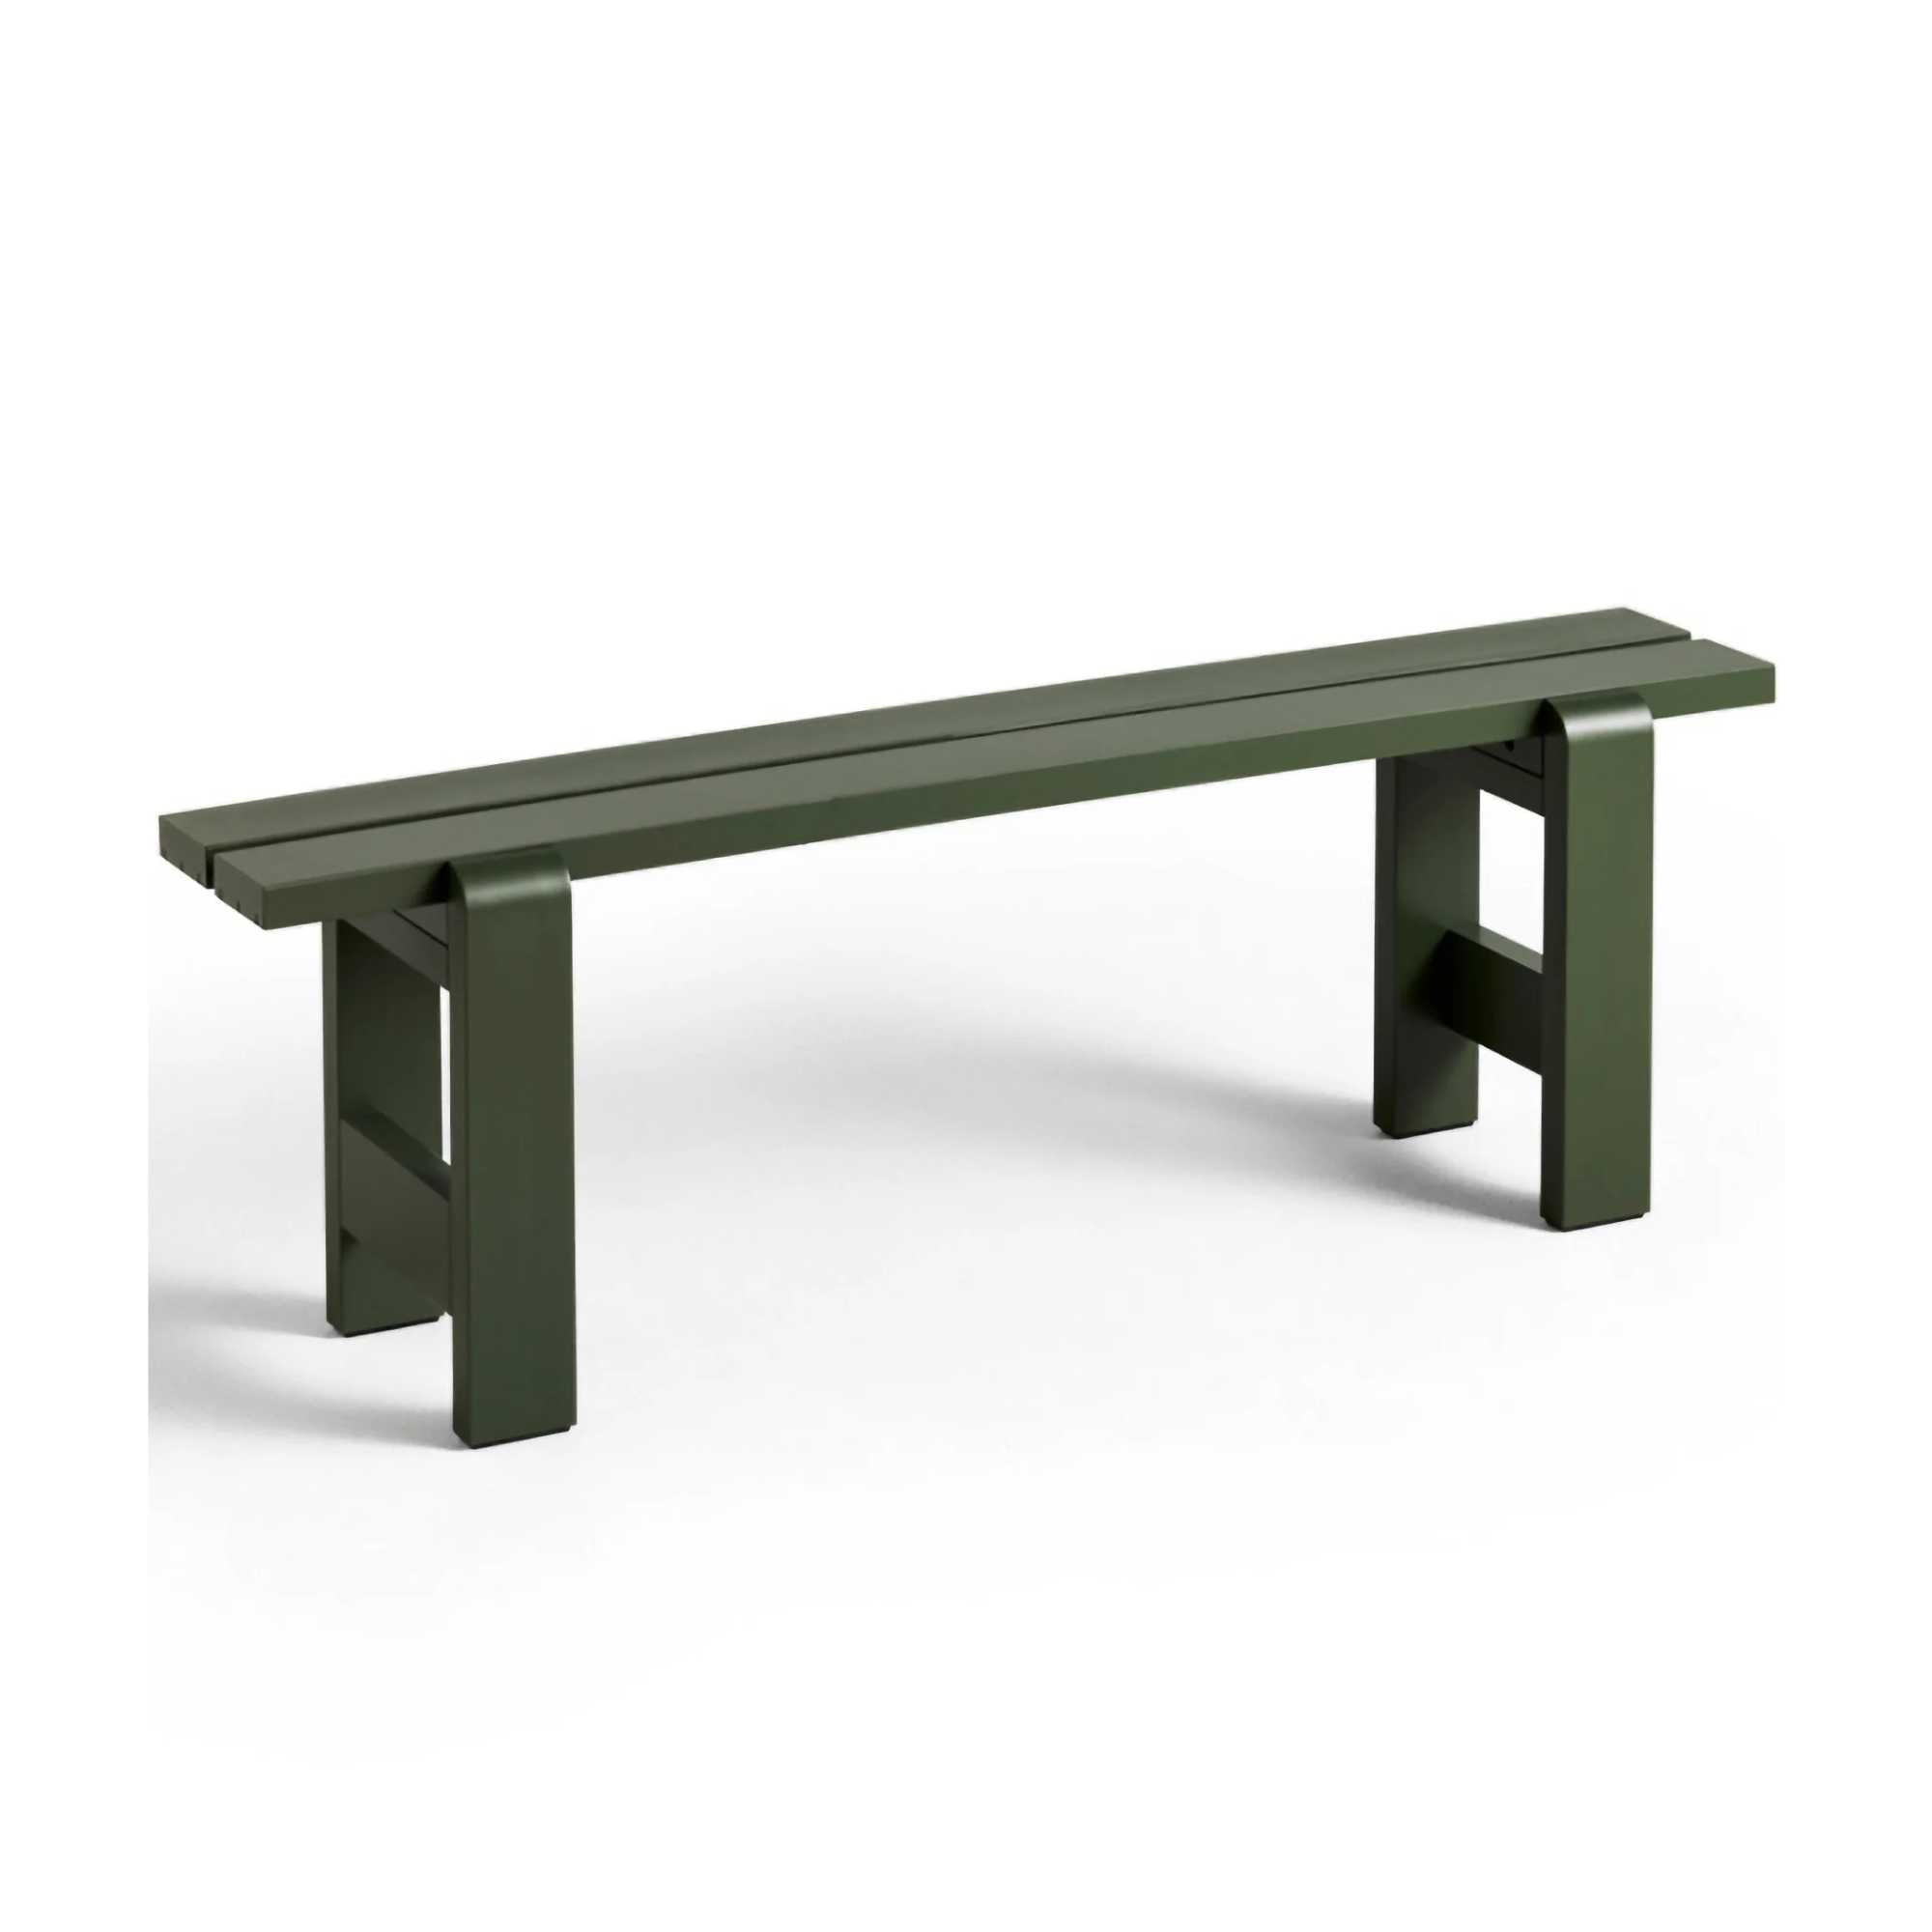 HAY Weekday Bench (140wx23dx45cmh), Olive